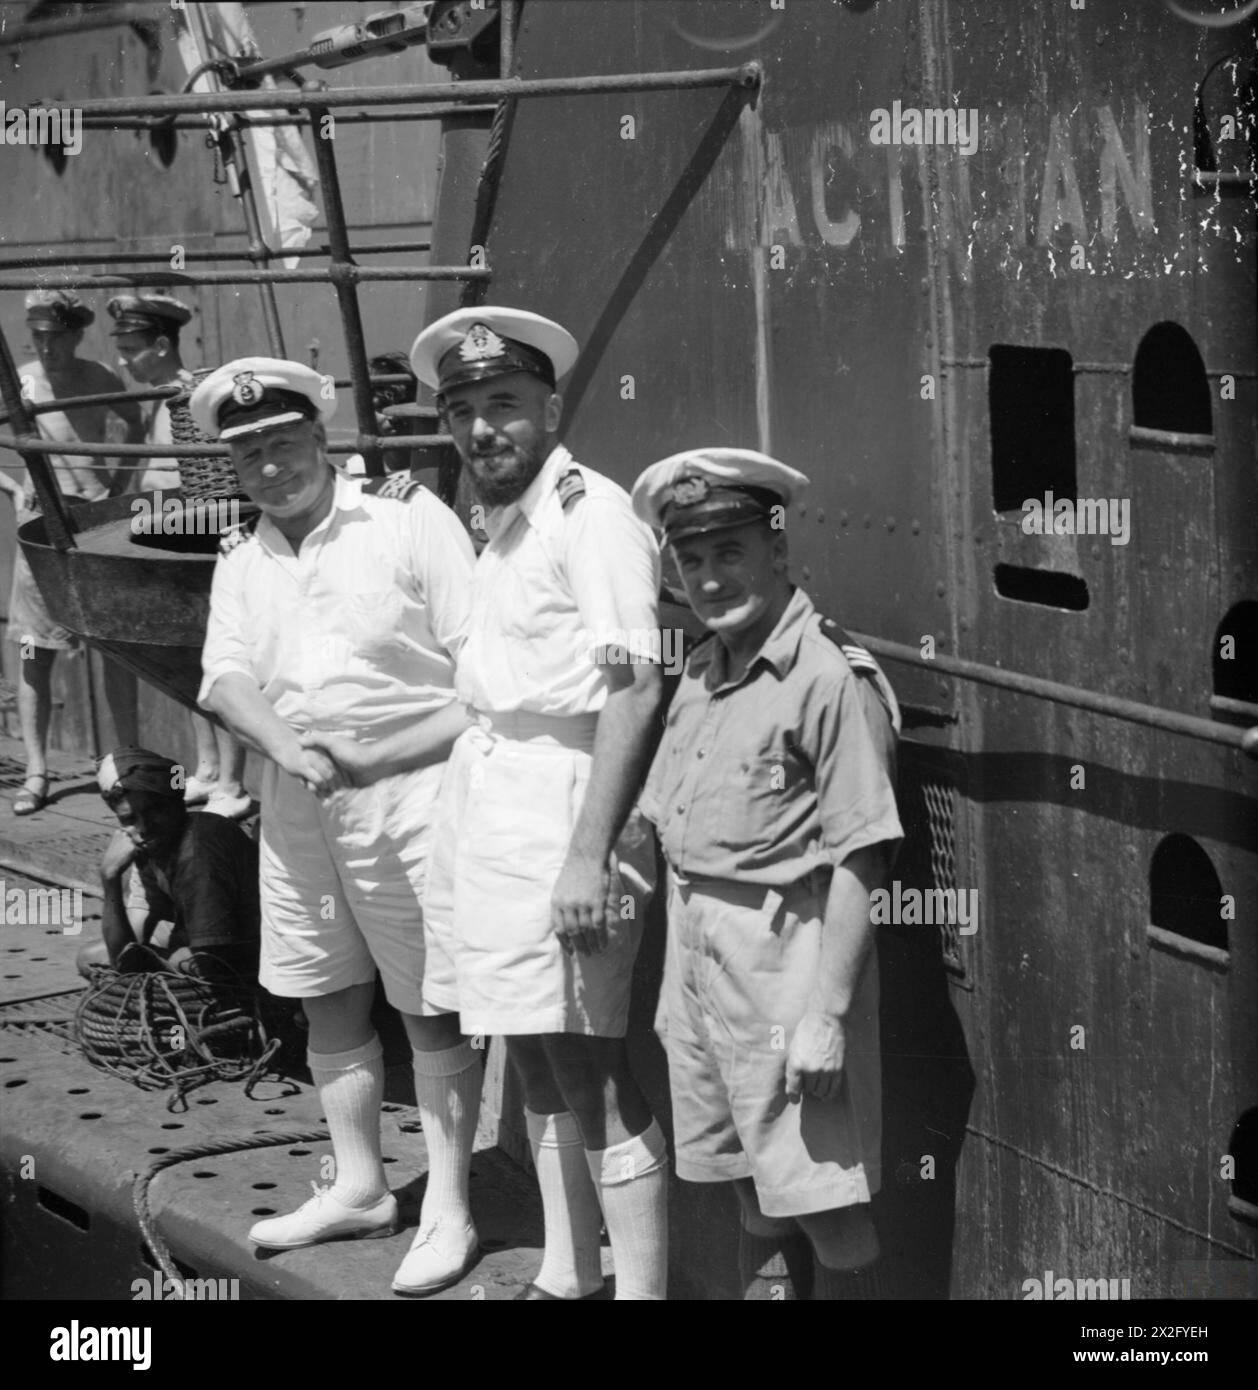 TACTICIANS MEET. 19 MARCH 1944, COLOMBO, CEYLON. LIEUTENANT COMMANDER ANTHONY F COLLETT, DSC, RN, COMMANDING OFFICER OF HM SUBMARINE TACTICIAN WITH TWO MERCHANT NAVY OFFICERS OF THE SS TACTICIAN. - Lieut Cdr A F Collett, DSC, RN, (centre) welcoming Captain Harriman (left) and Mr L J Williams (right) of the SS TACTICIAN, onto his submarine HMS TACTICIAN Stock Photo